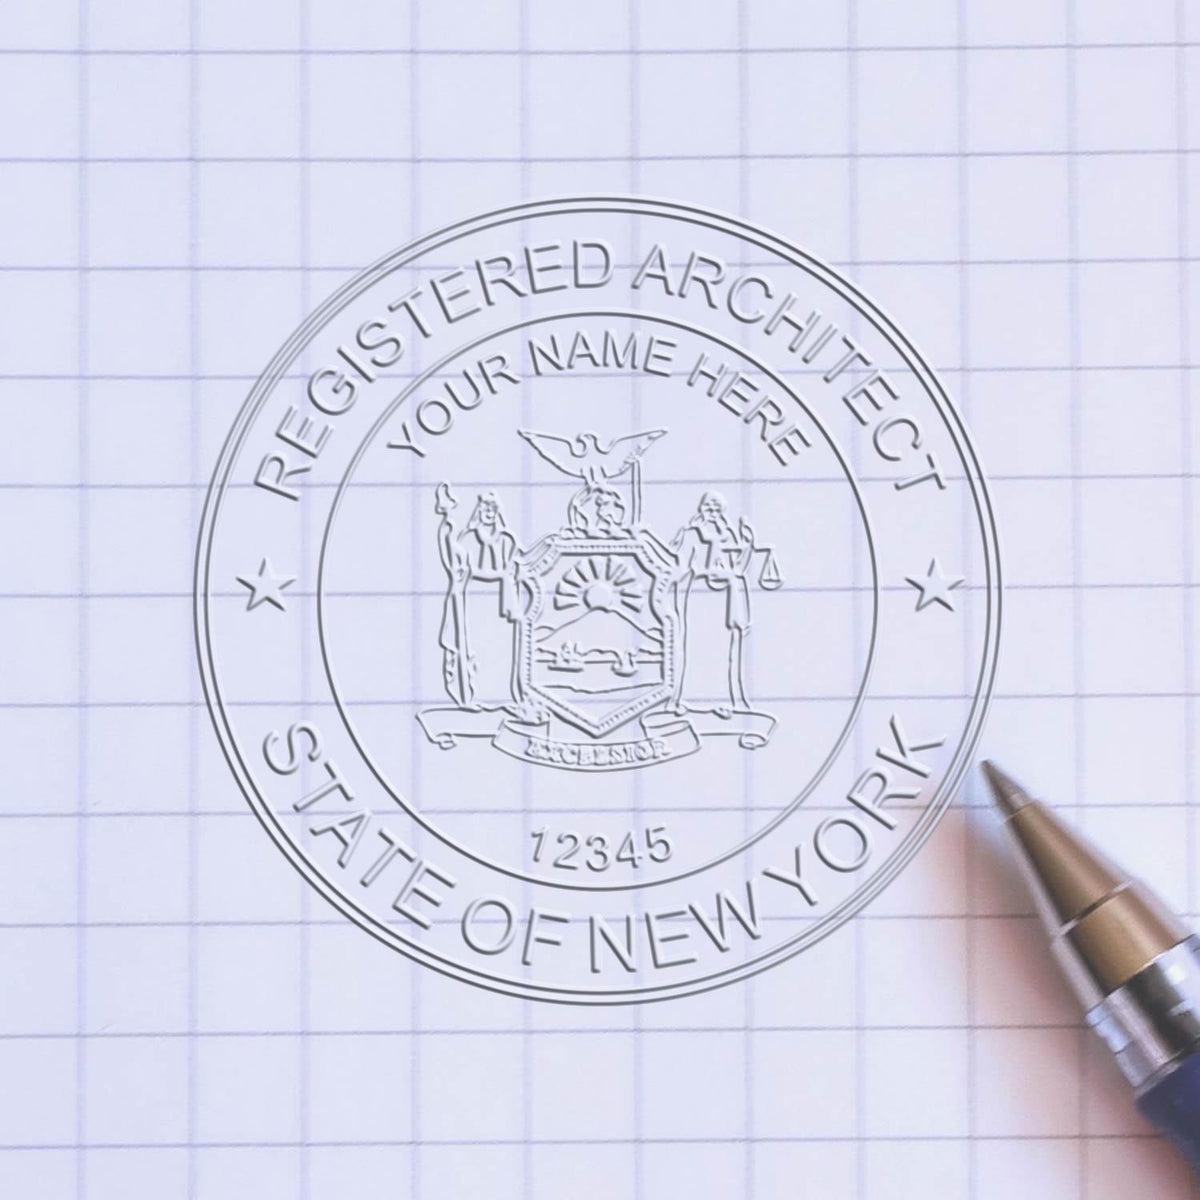 This paper is stamped with a sample imprint of the Extended Long Reach New York Architect Seal Embosser, signifying its quality and reliability.